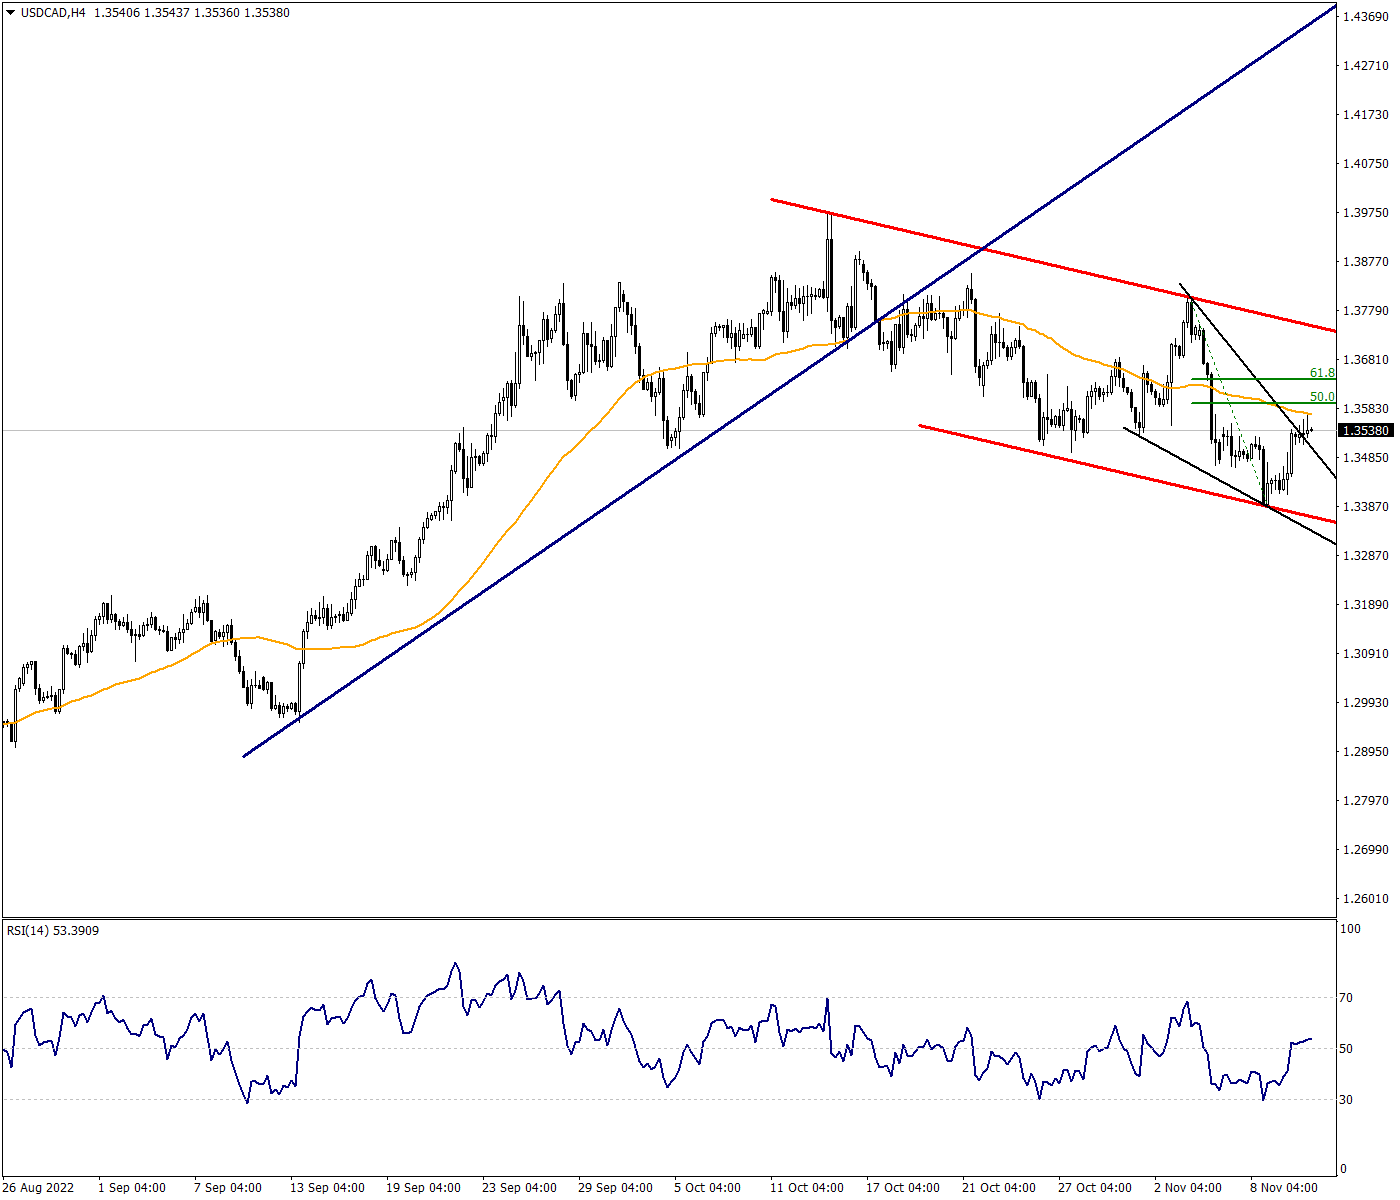 USDCAD Parity Breaks the Wedge